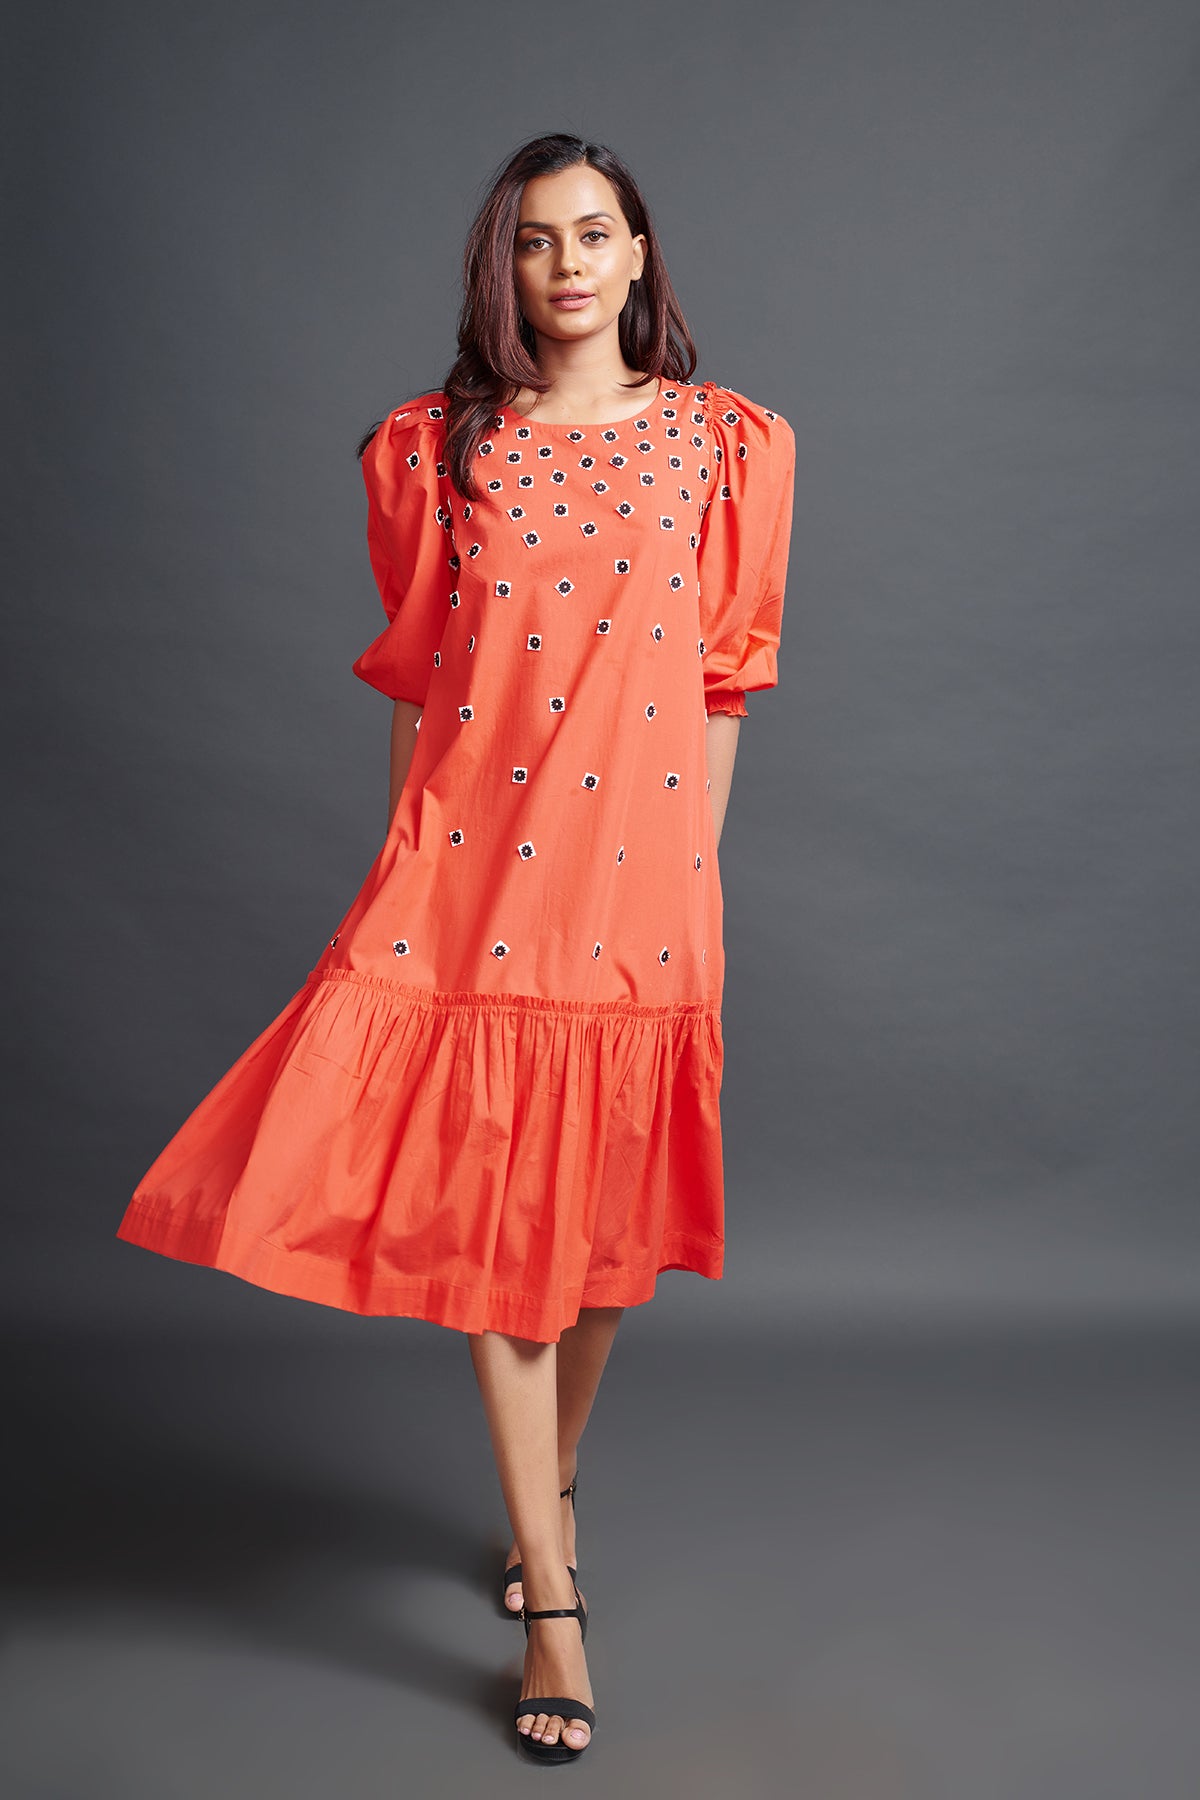 Image of ORANGE GATHERED HEM DRESS IN COTTON BASE WITH CUTWORK EMBROIDERY. From savoirfashions.com